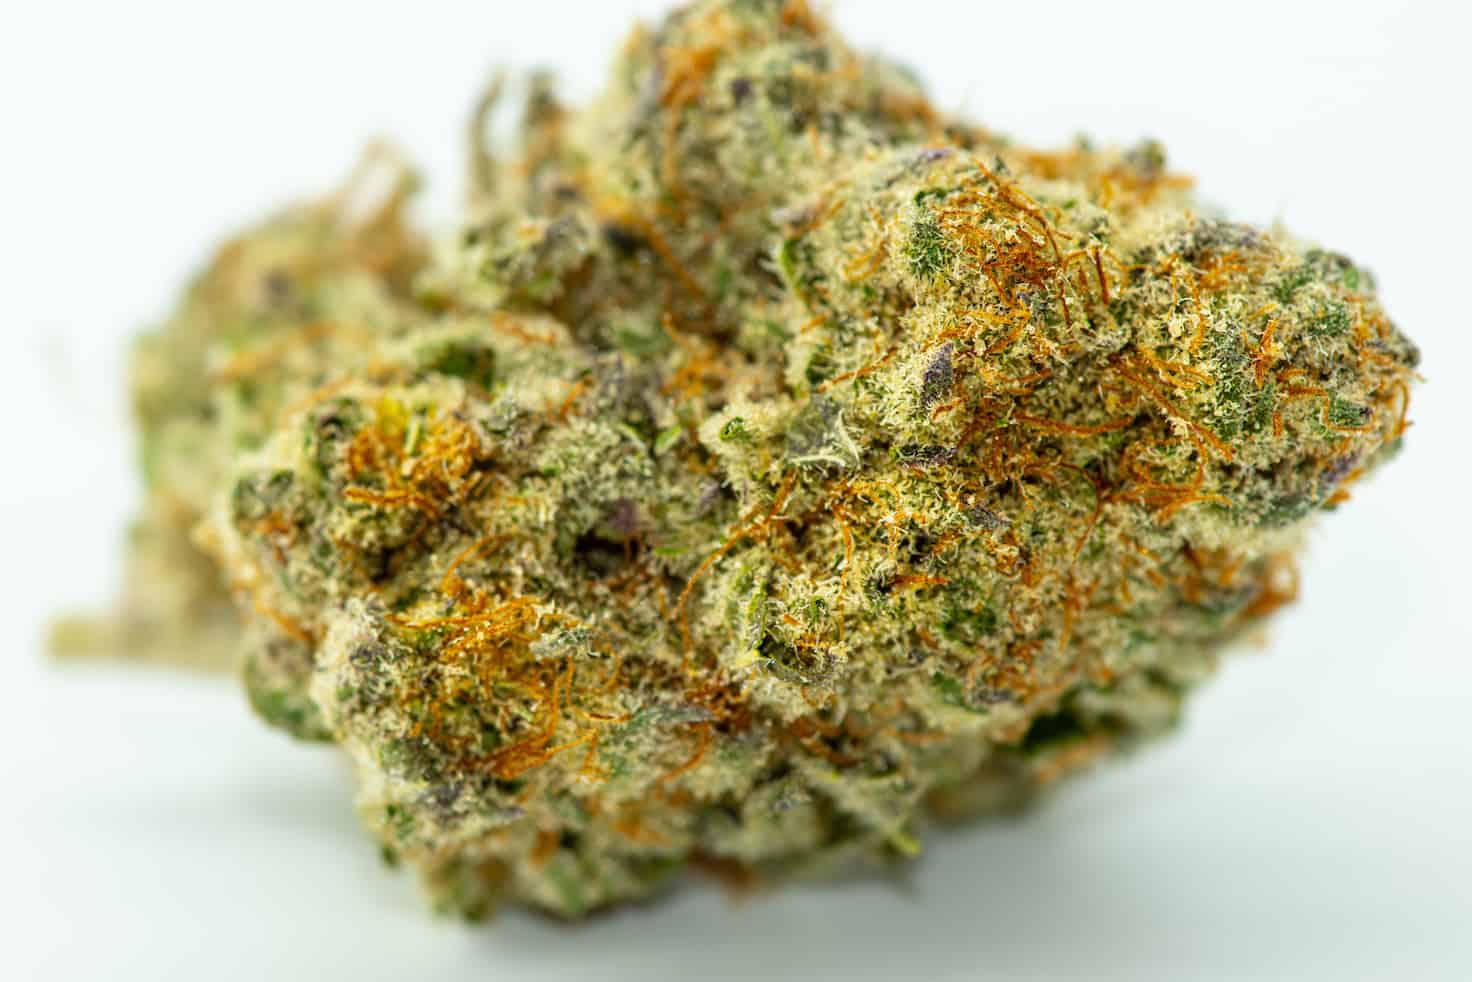 Ultimate White Widow Strain Review and Information